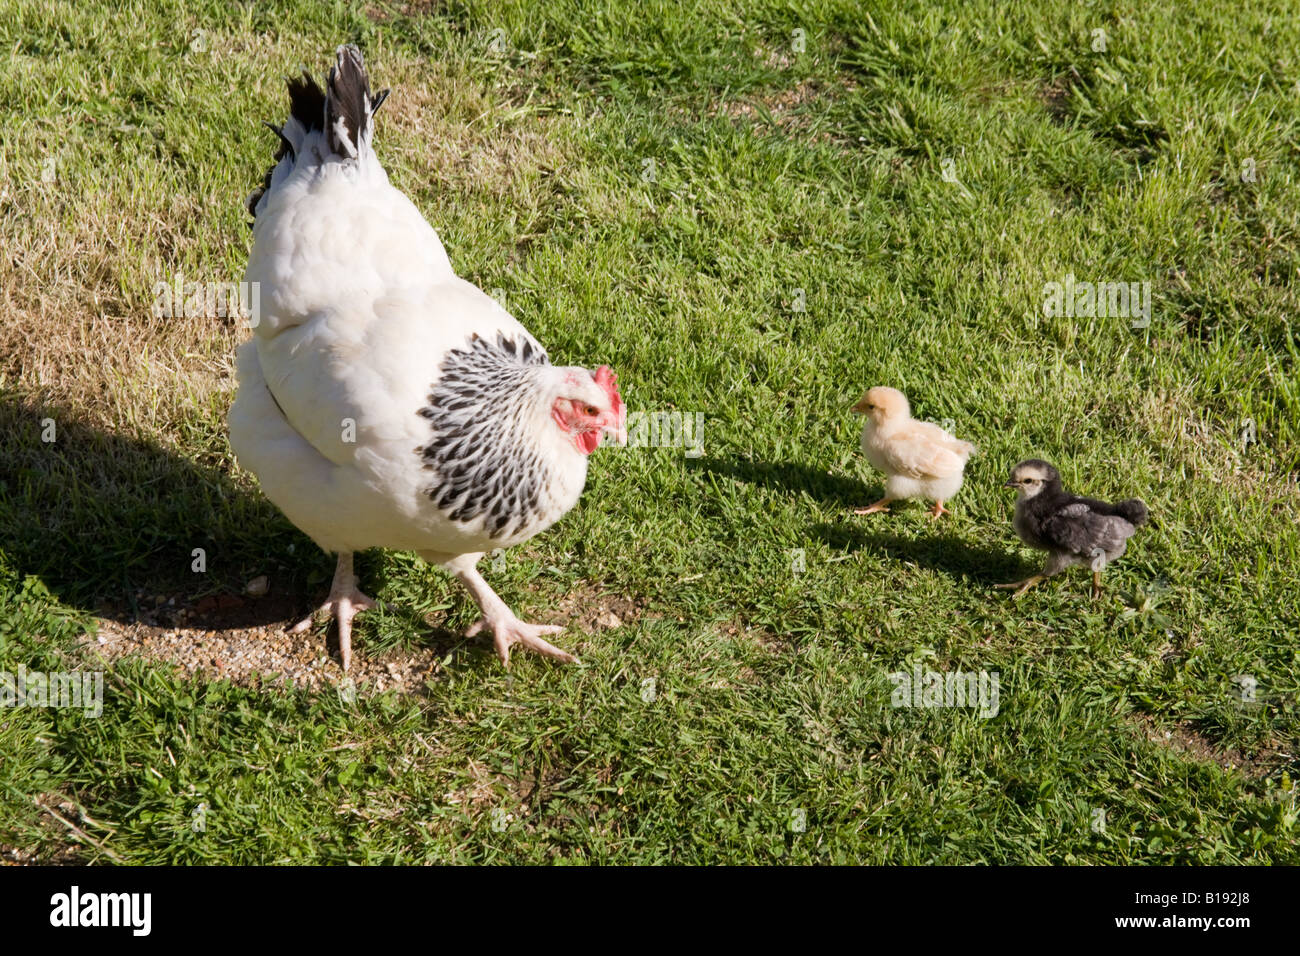 Baby chickens chicks and mother hen, Hampshire England Stock Photo